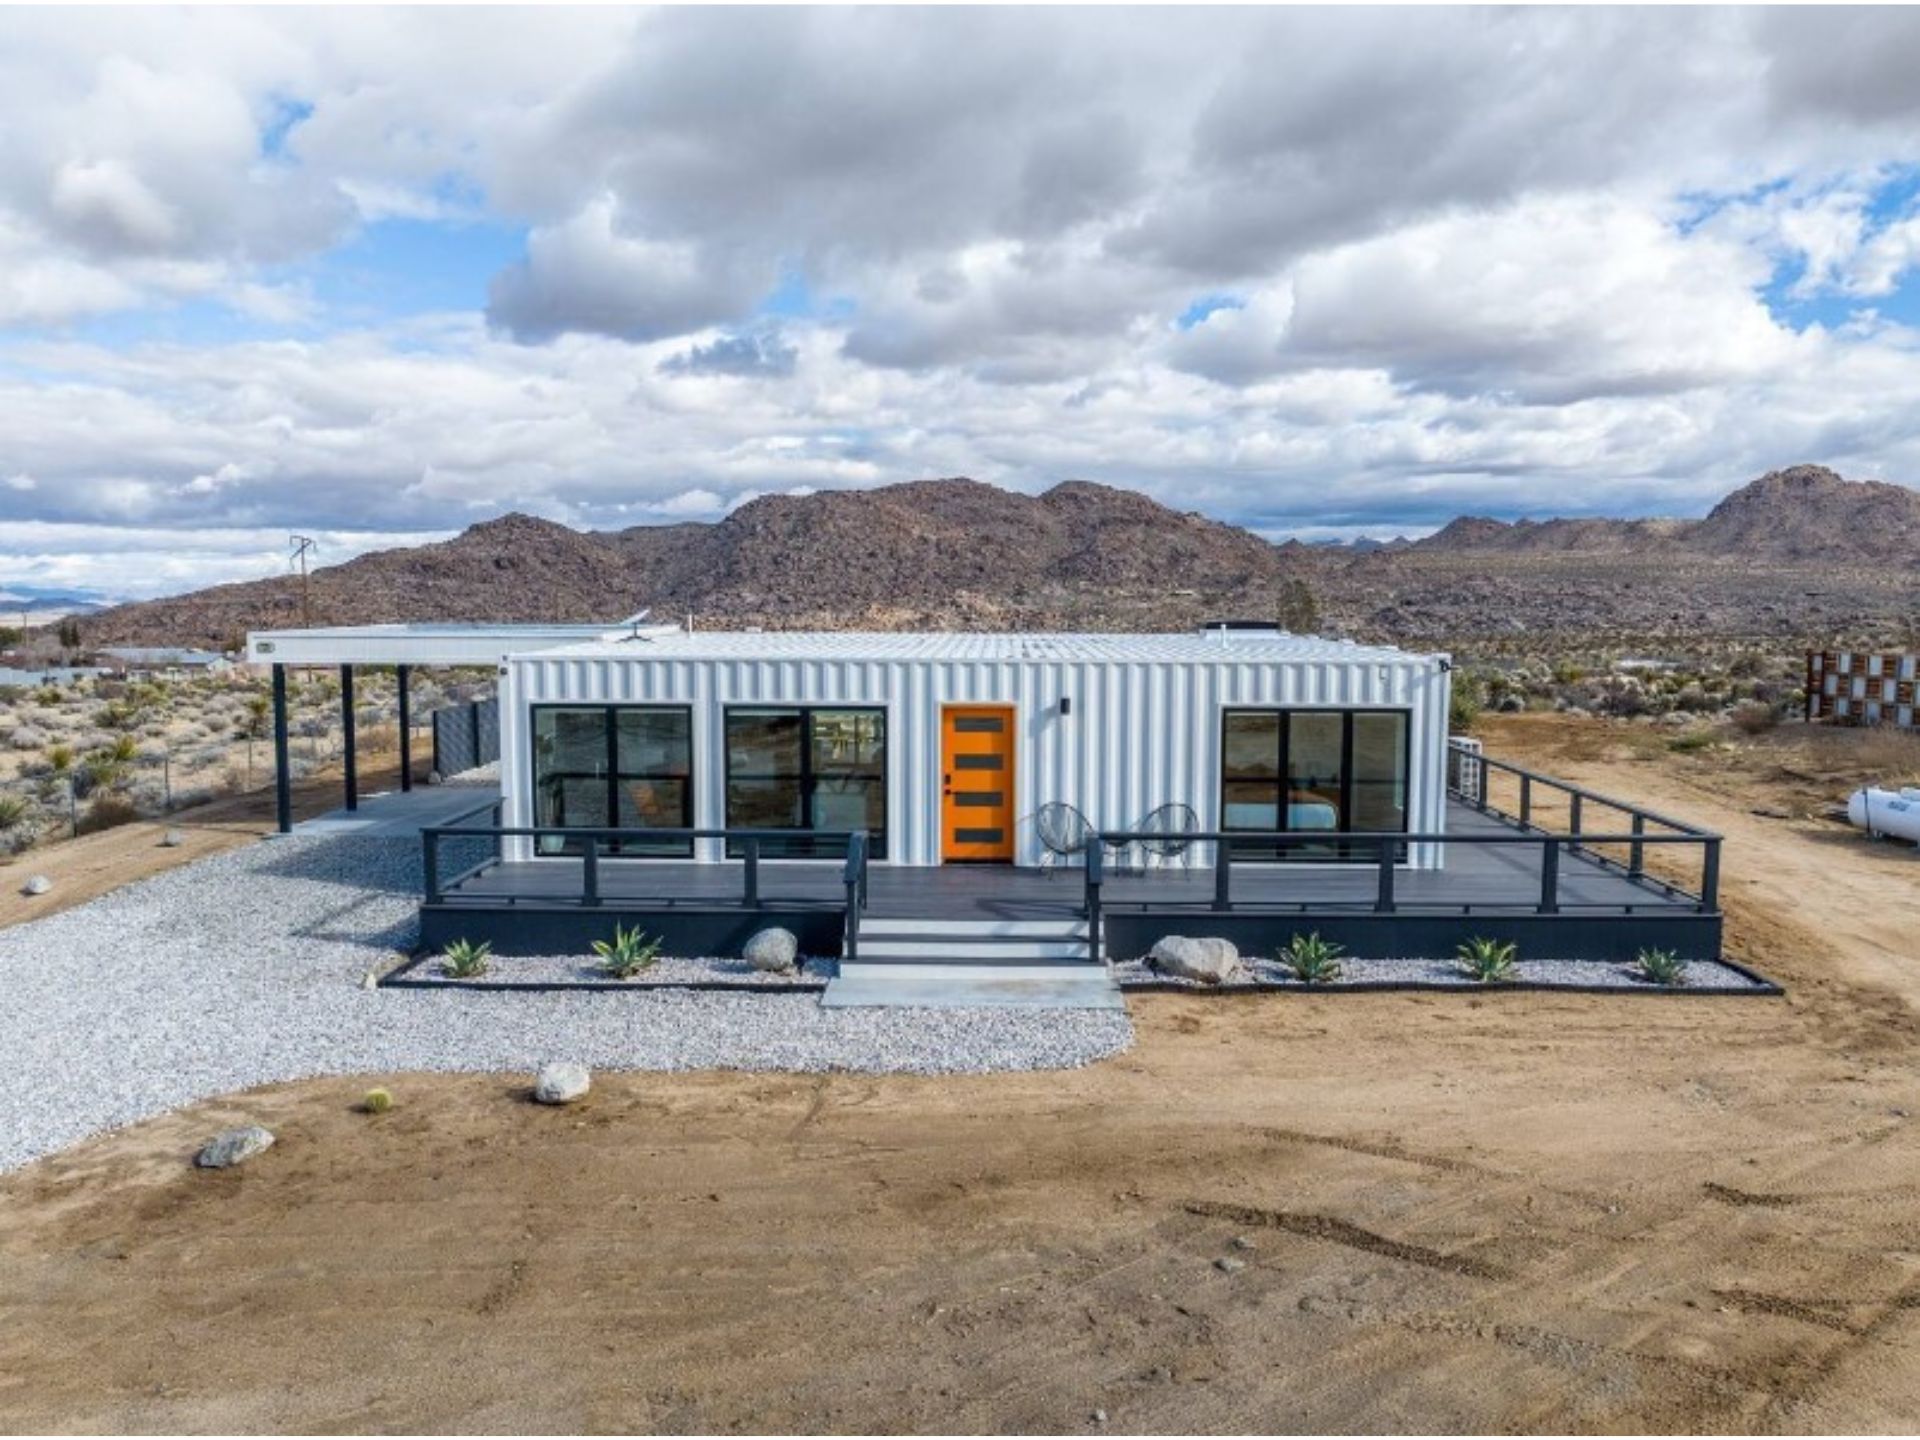 Get Ready For A Vacation In The Desert In This Stunning Container House